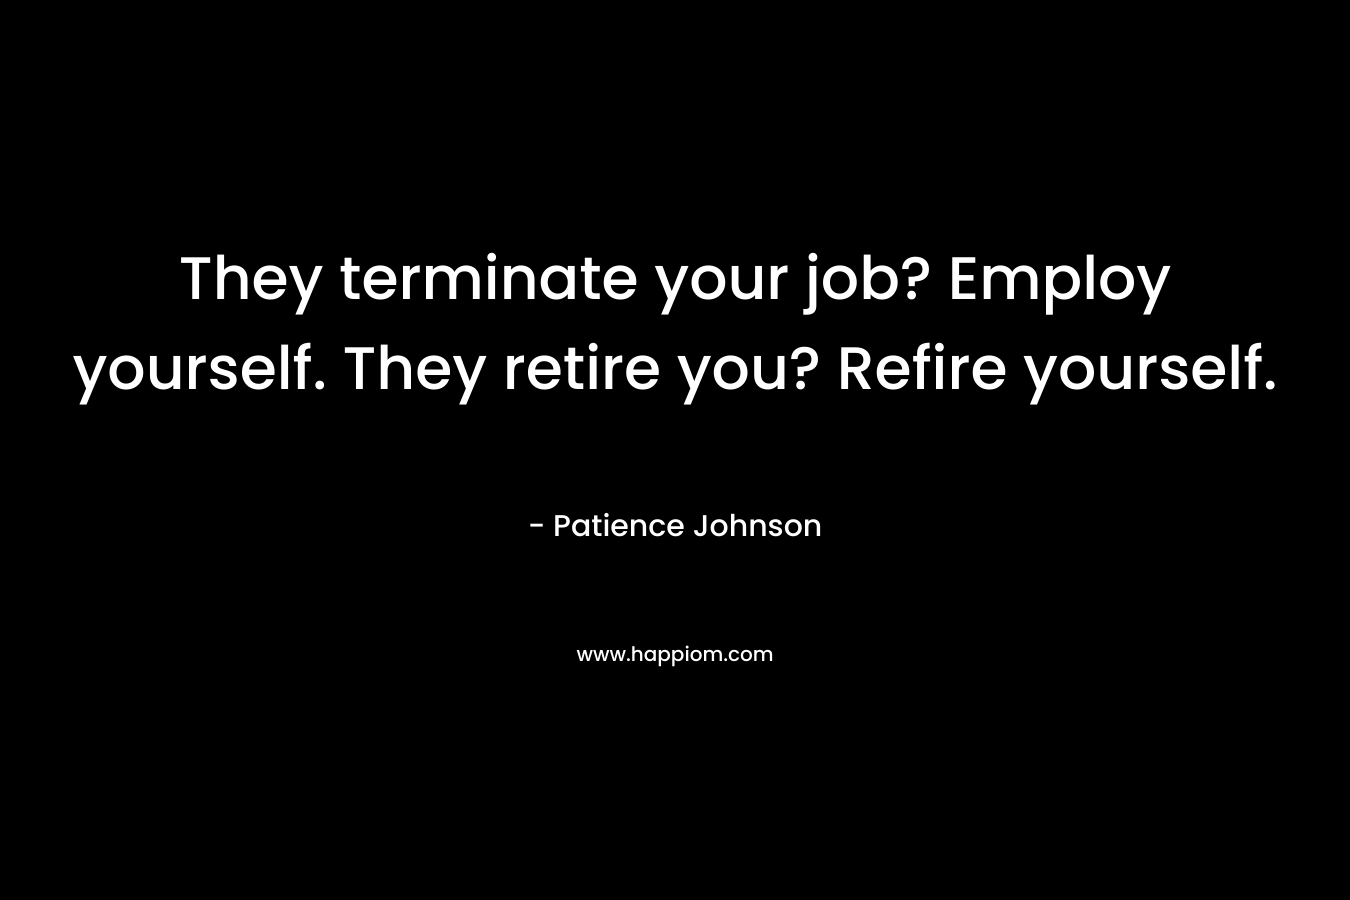 They terminate your job? Employ yourself. They retire you? Refire yourself. – Patience Johnson